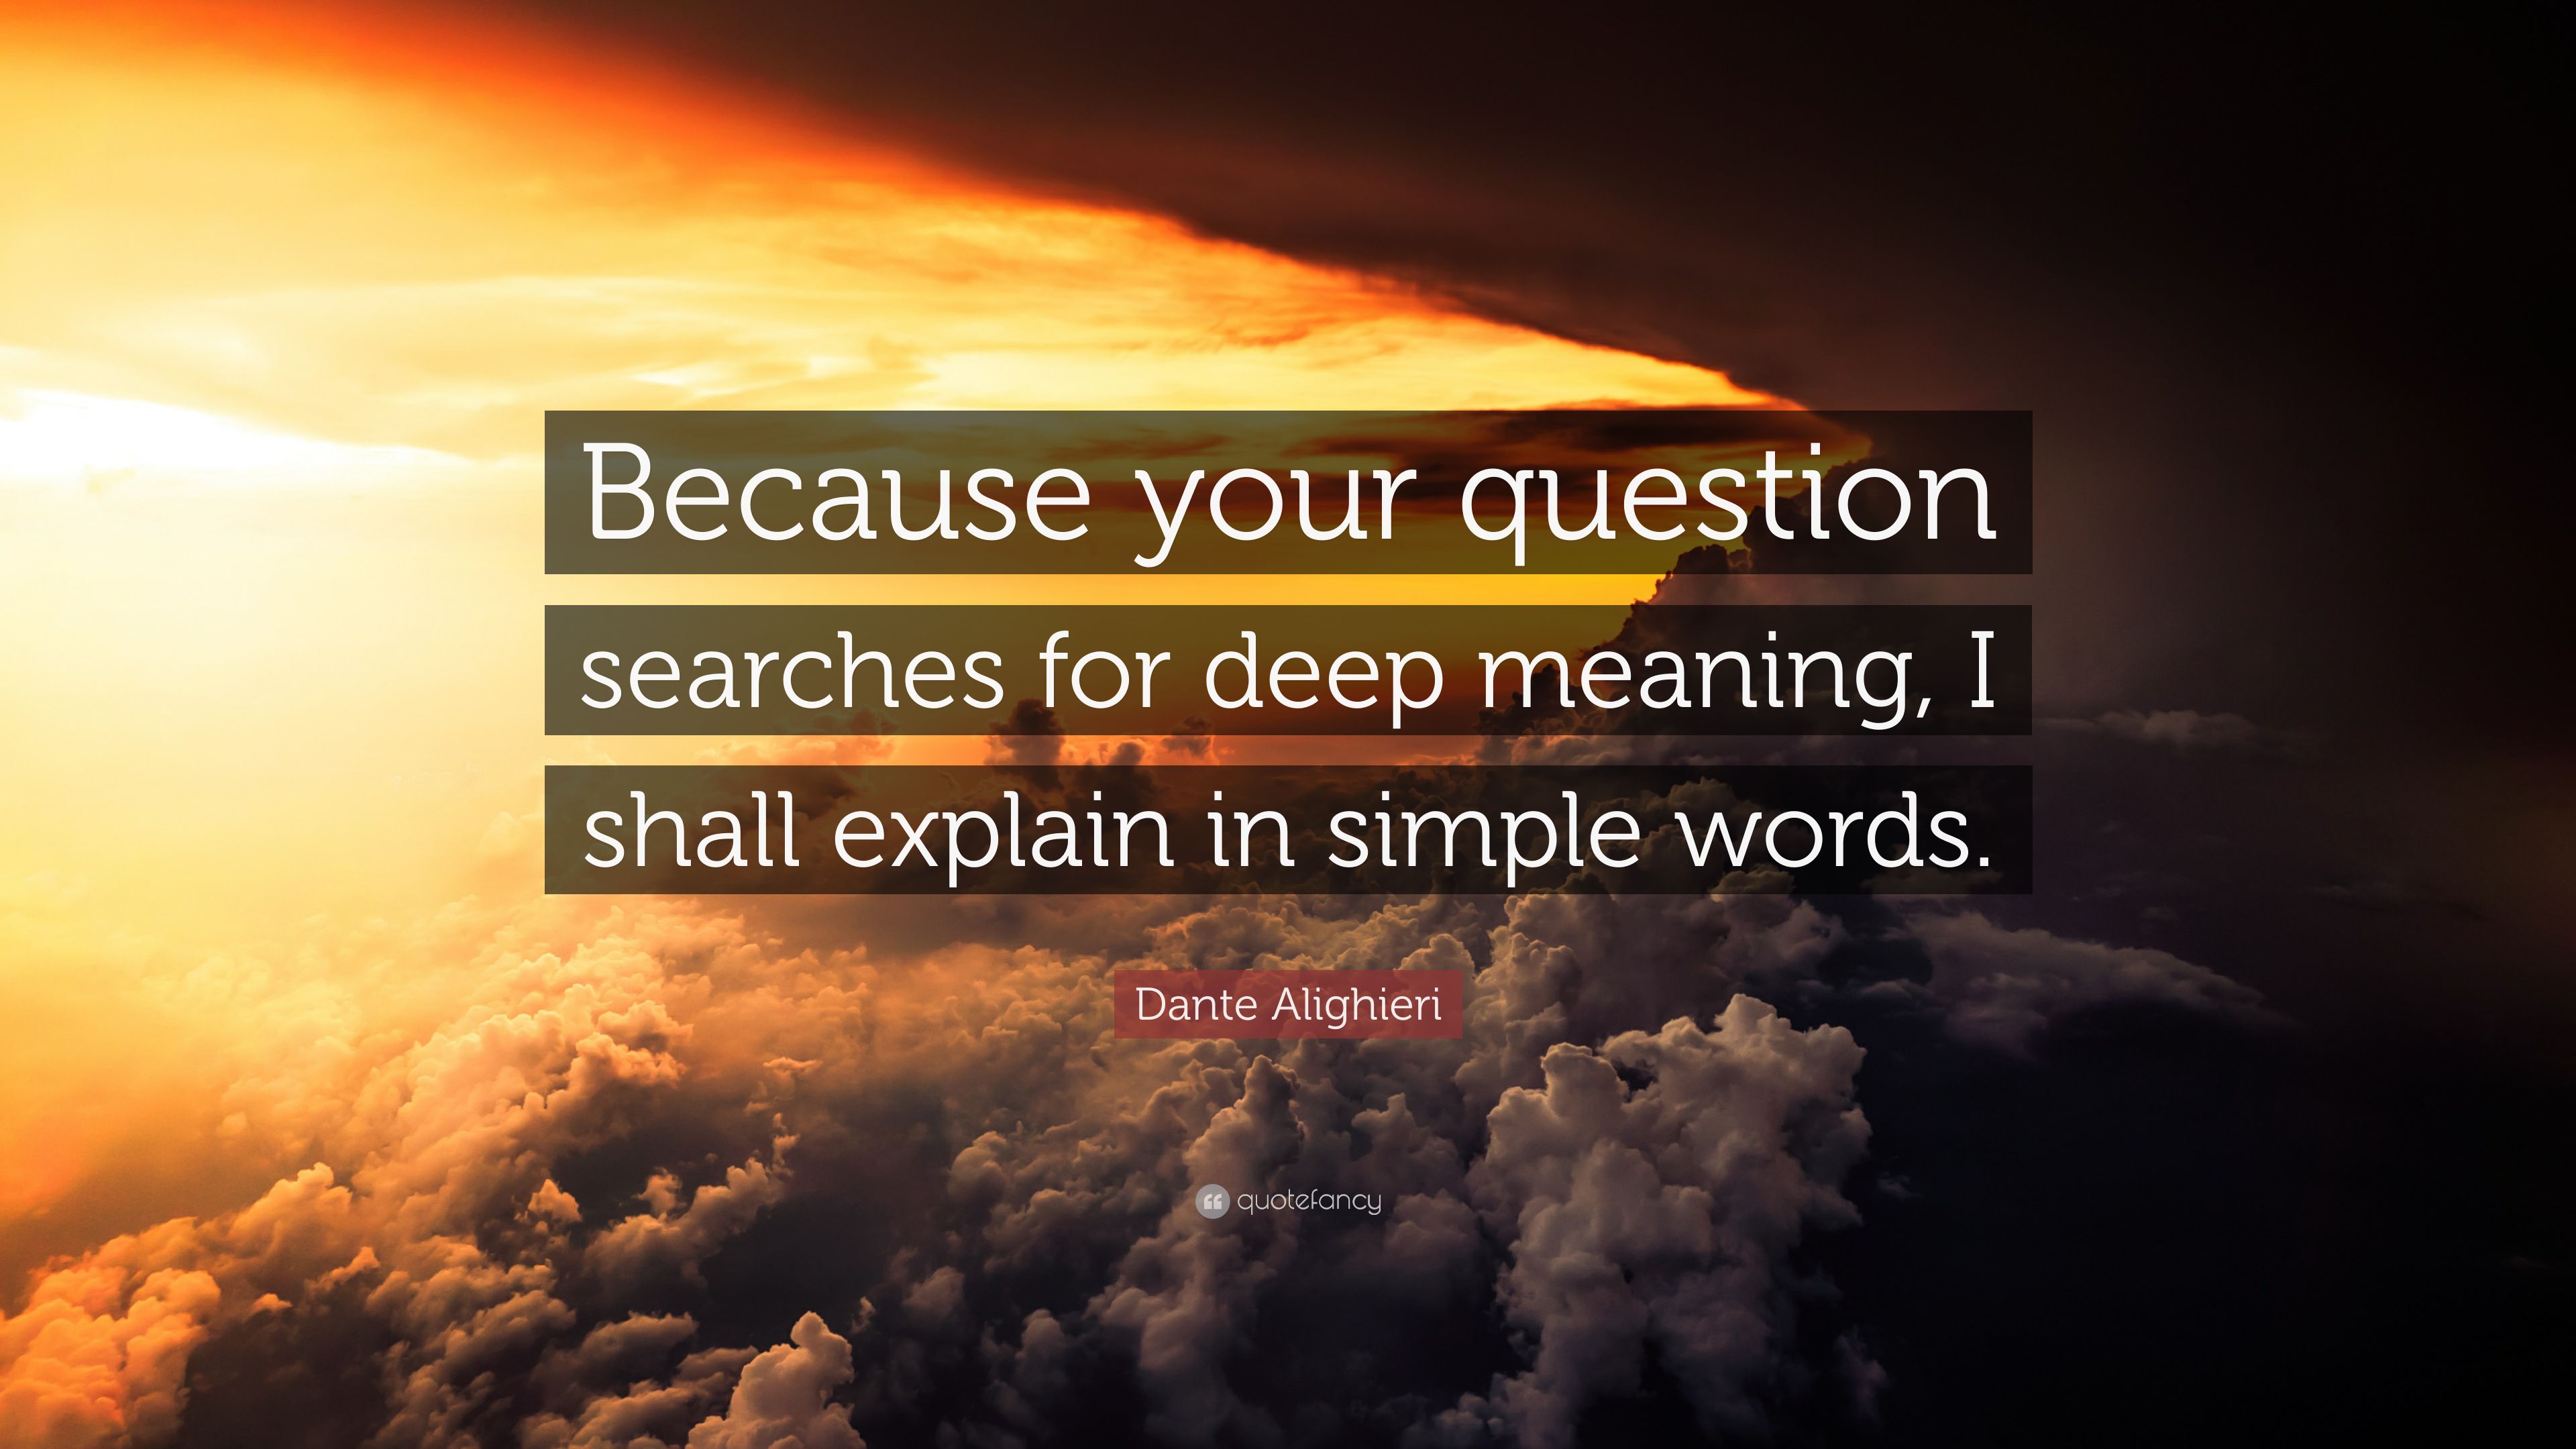 Dante Alighieri Quote: “Because your question searches for deep